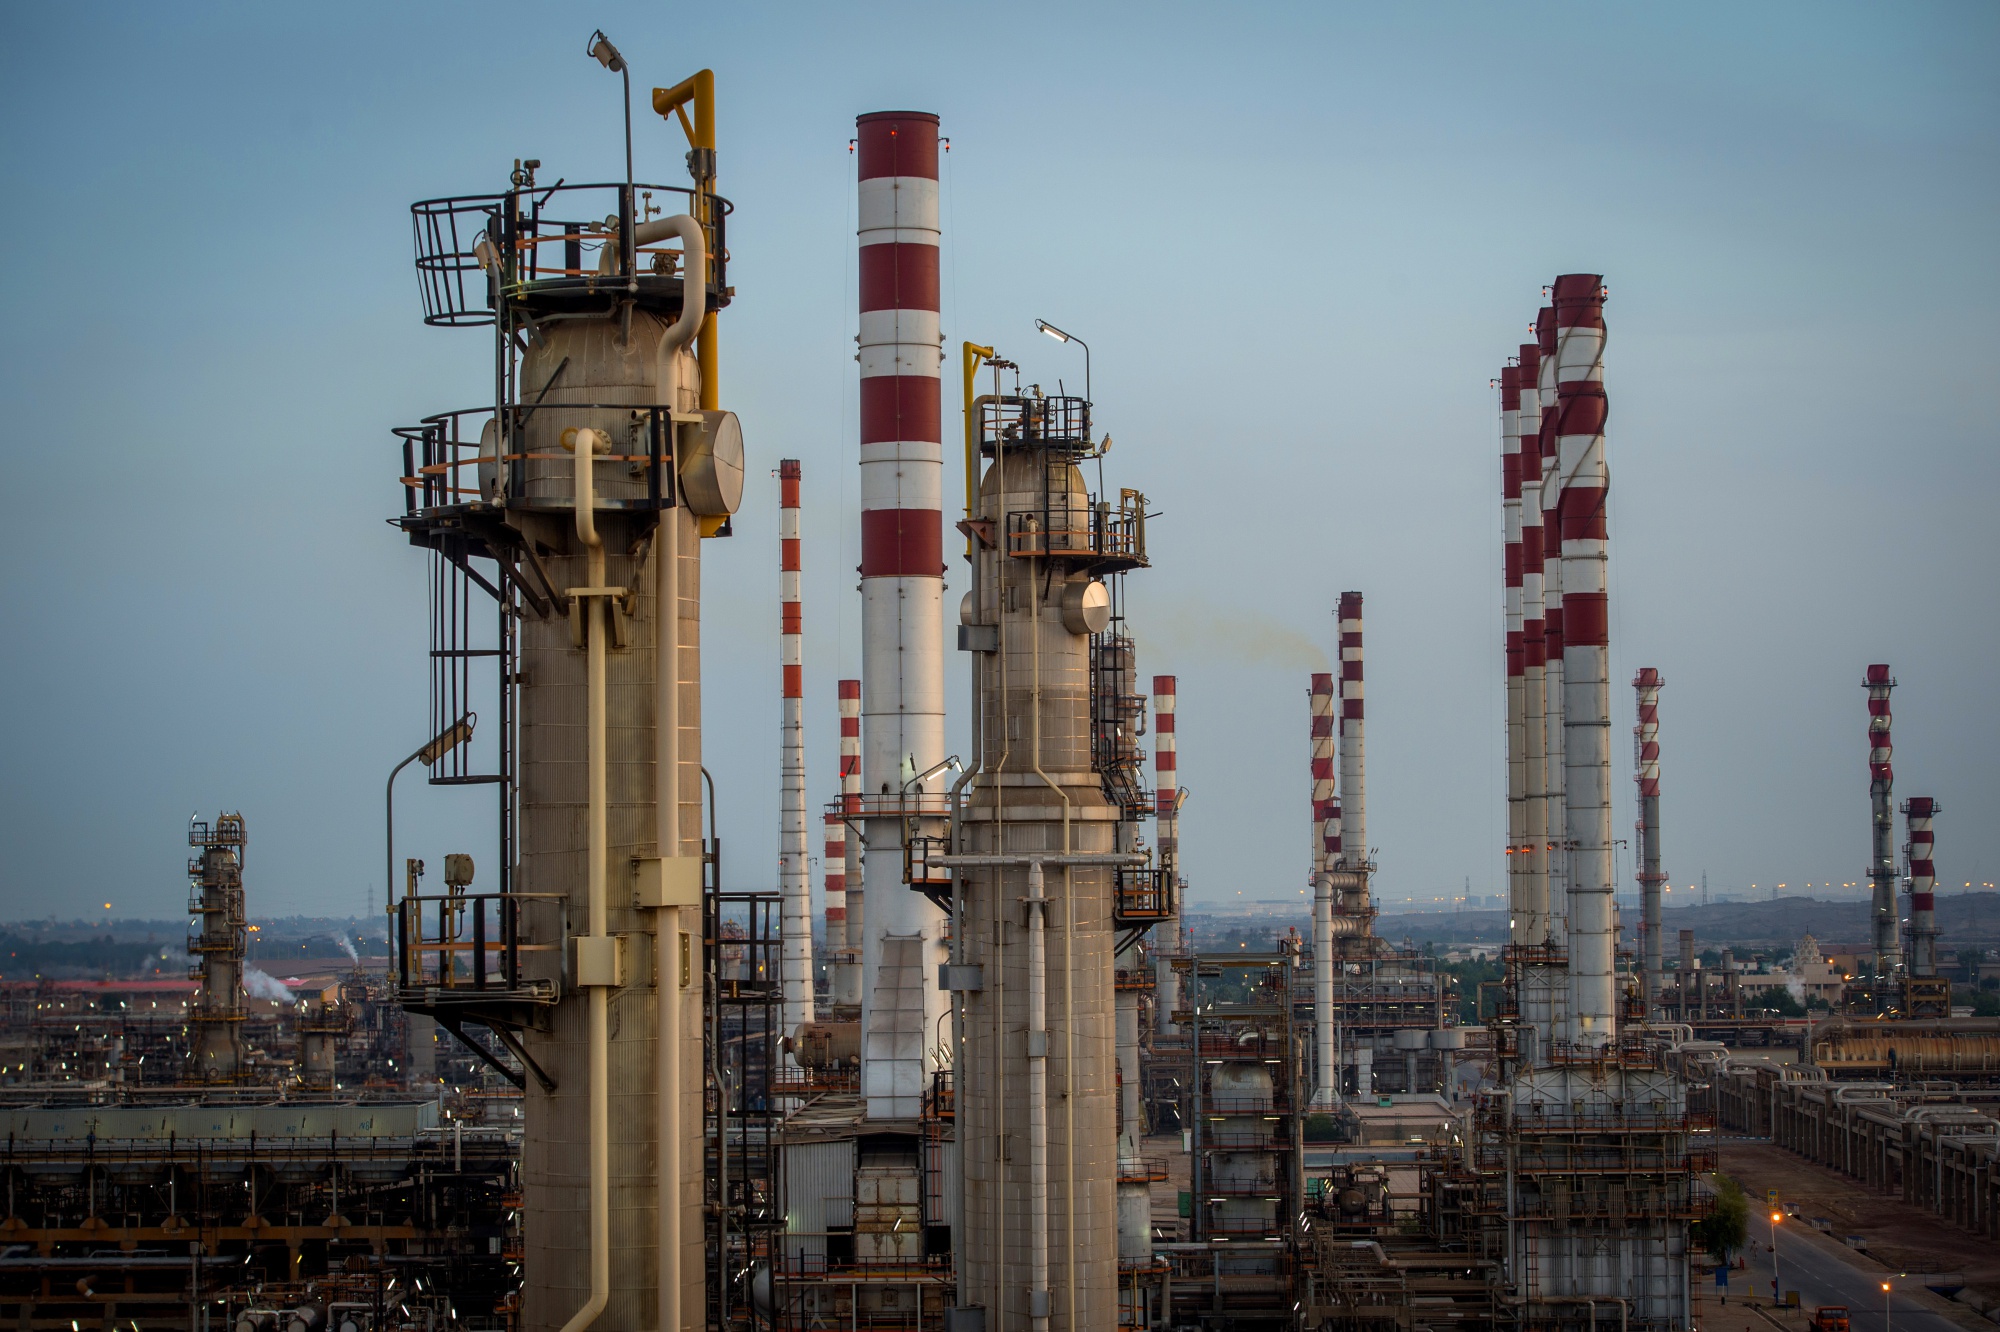 Cracking towers and chimneys stand at the processing plant at the Persian Gulf Star Co. (PGSPC) gas condensate refinery in Bandar Abbas, Iran, on Wednesday, Jan. 9. 2019. The third phase of the refinery begins operations next week and will add 12-15 million liters a day of gasoline output capacity to the plant, Deputy Oil Minister Alireza Sadeghabadi told reporters. Photographer: Ali Mohammadi/Bloomberg